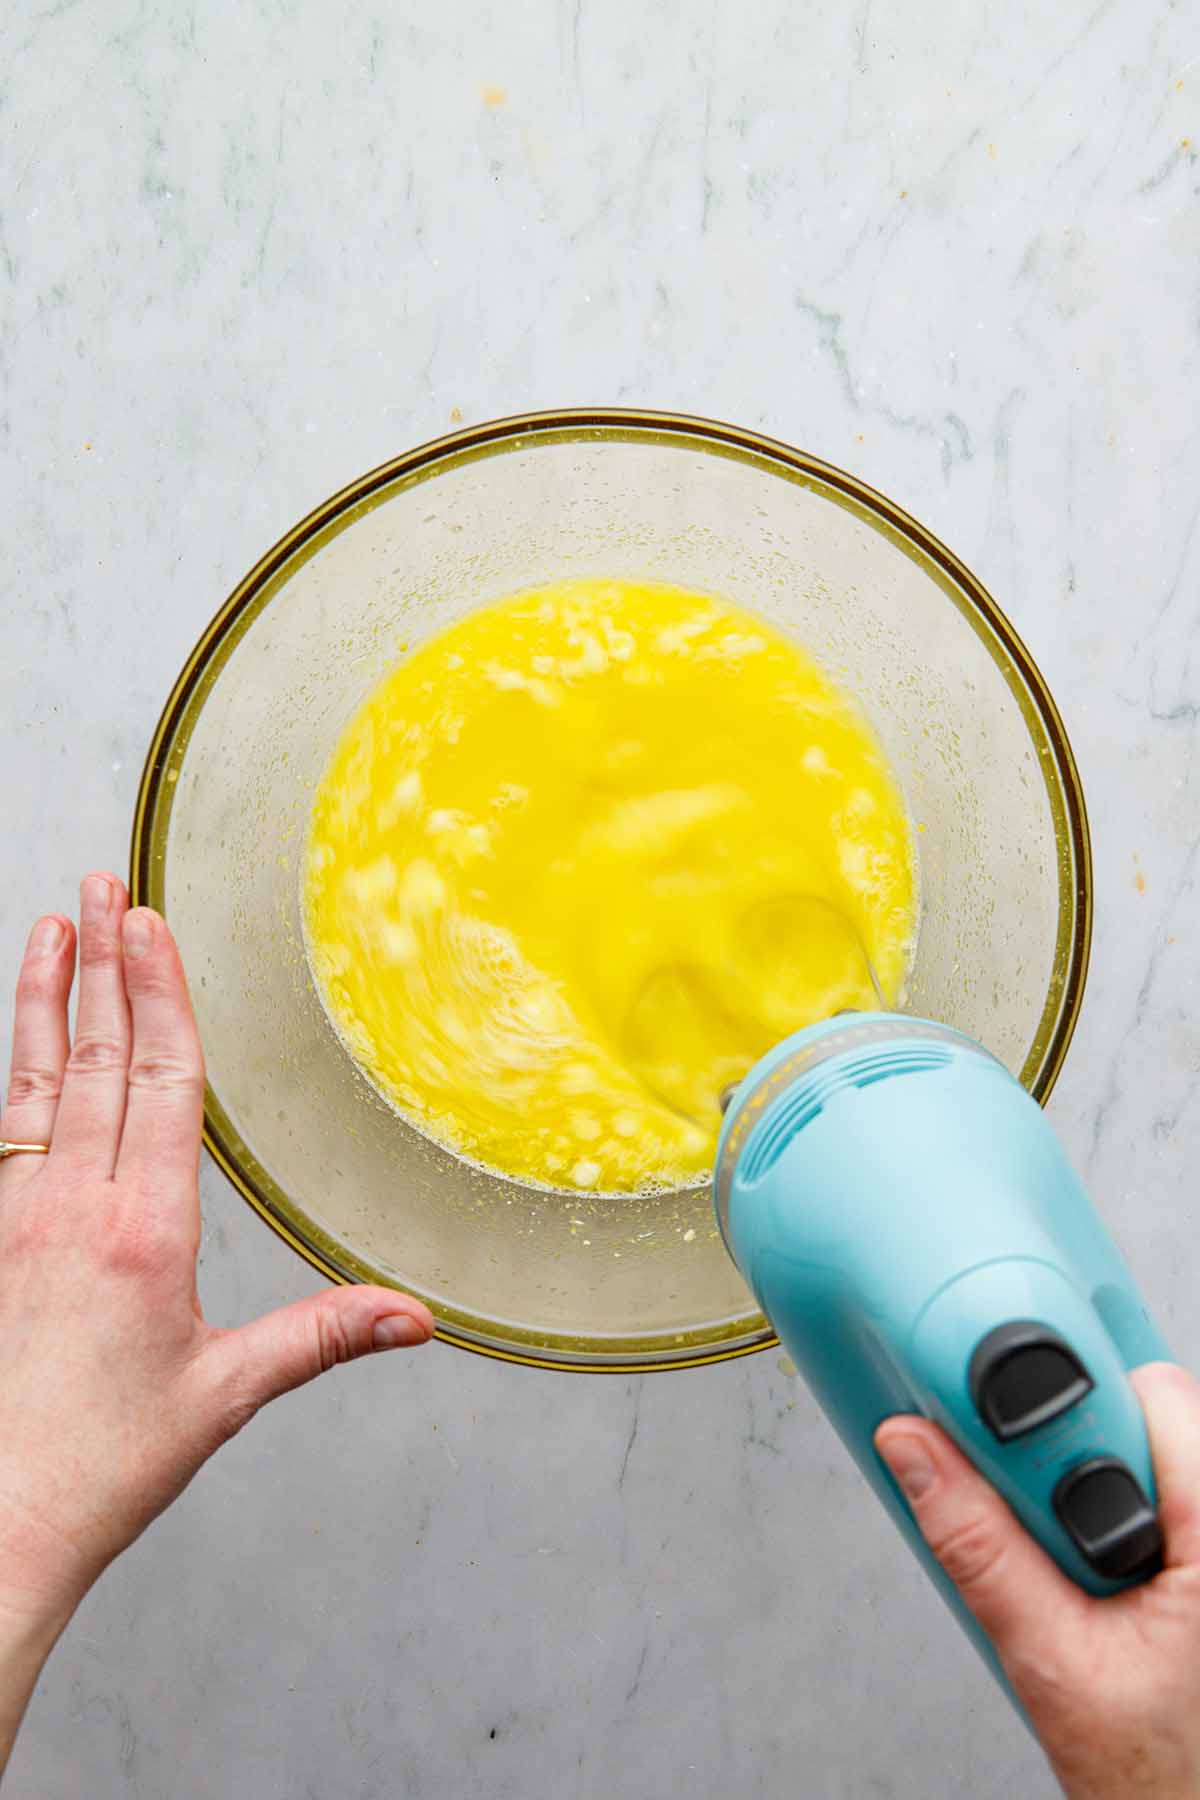 A hand using a hand mixer to mix bits of butter into a yellow liquid.